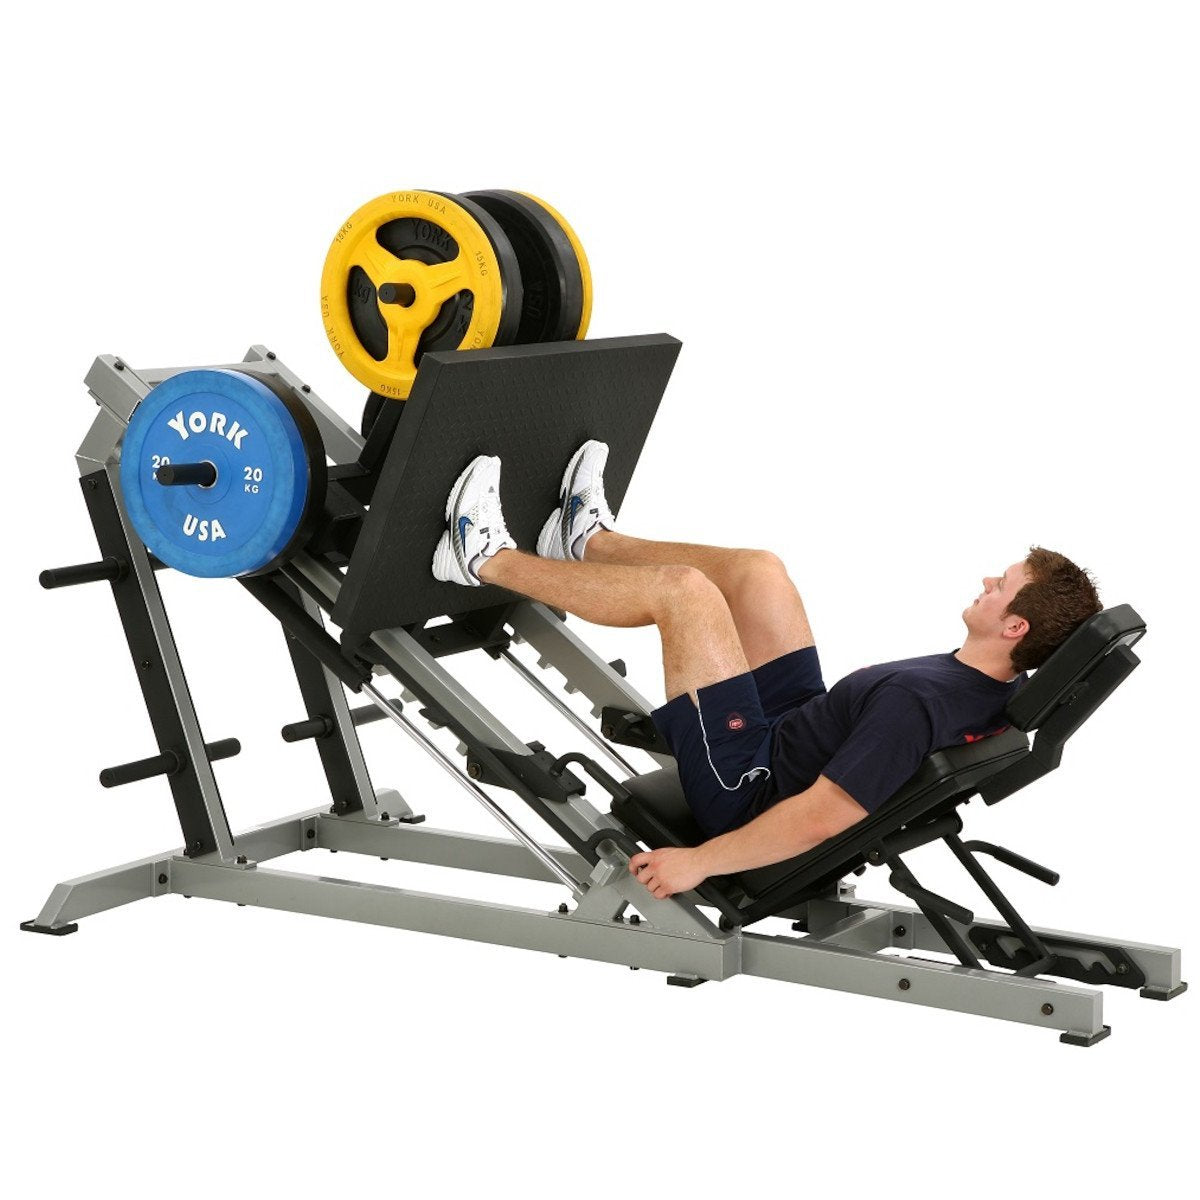 York STS 35 Degree Leg Press shown with weights